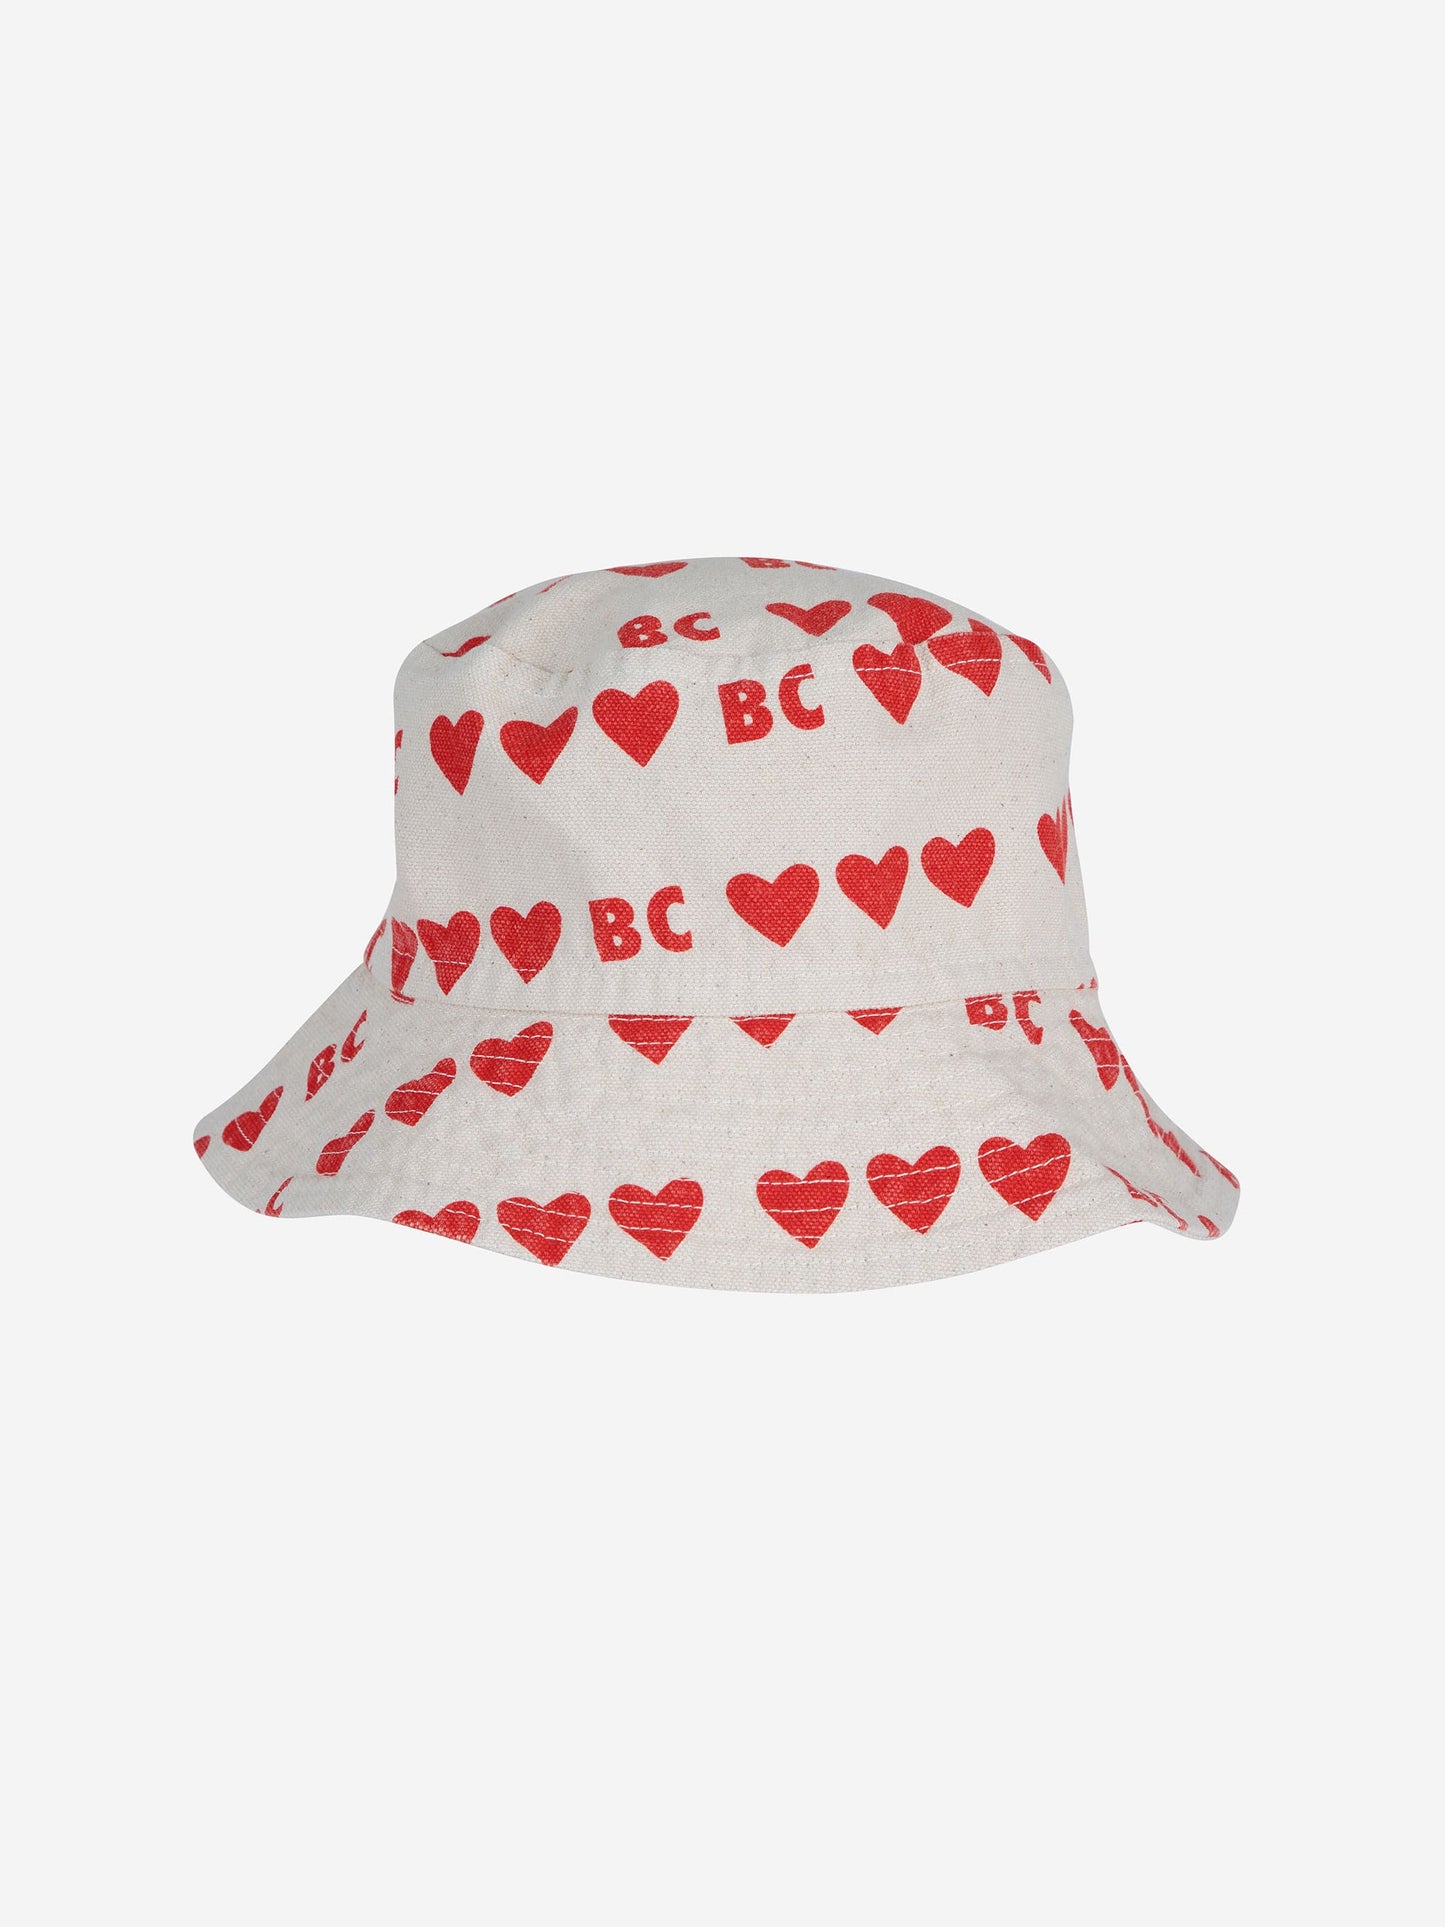 BC hearts all over bucket hat